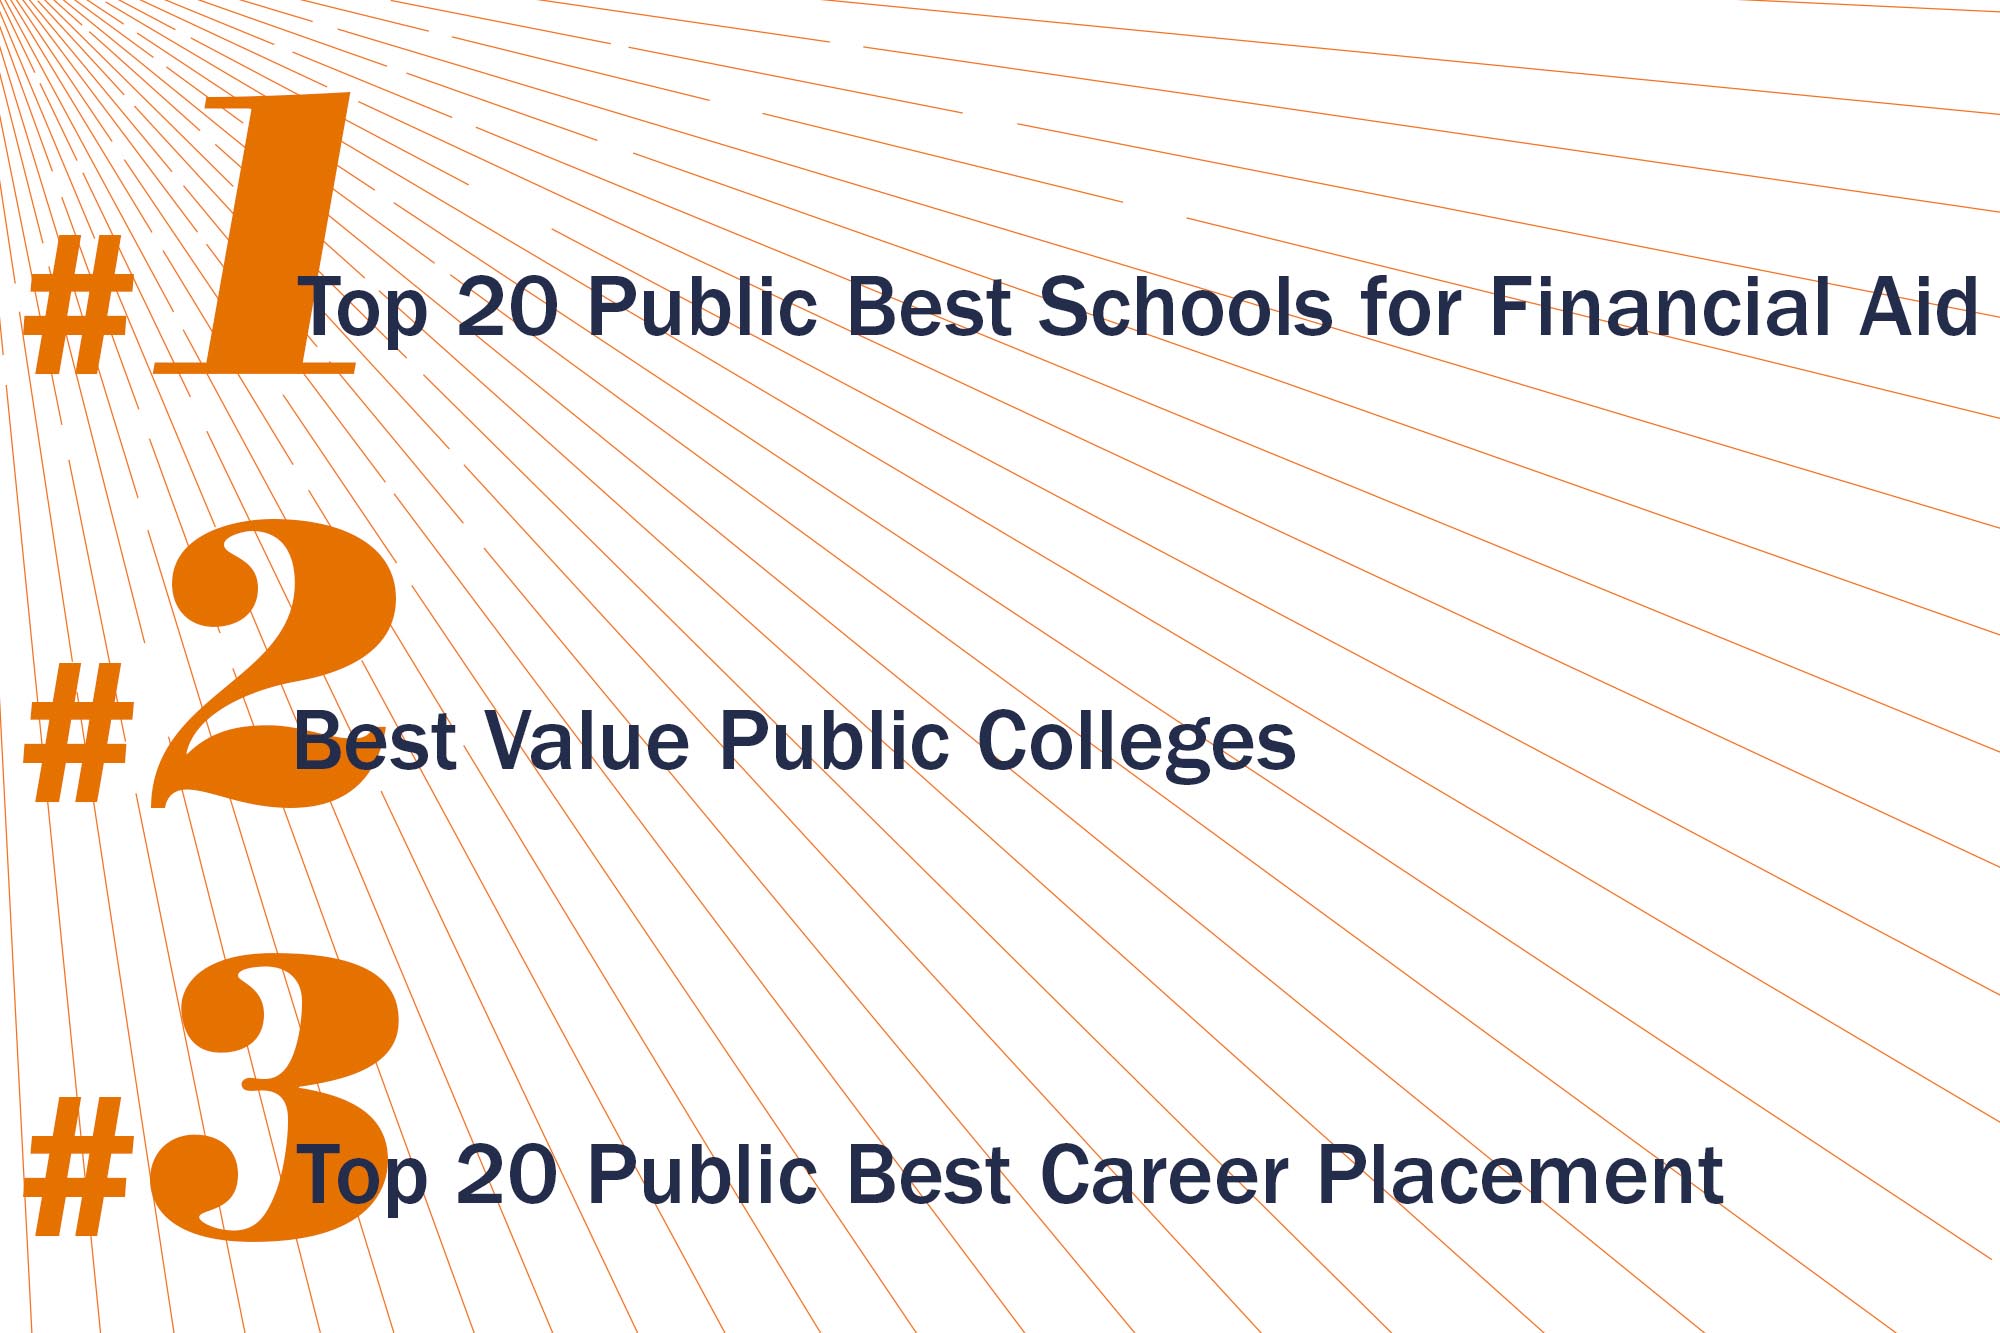 text reads: #1 Top 20 public best schools for financial aid #2 Best value public colleges #3 top 20 public best career placement